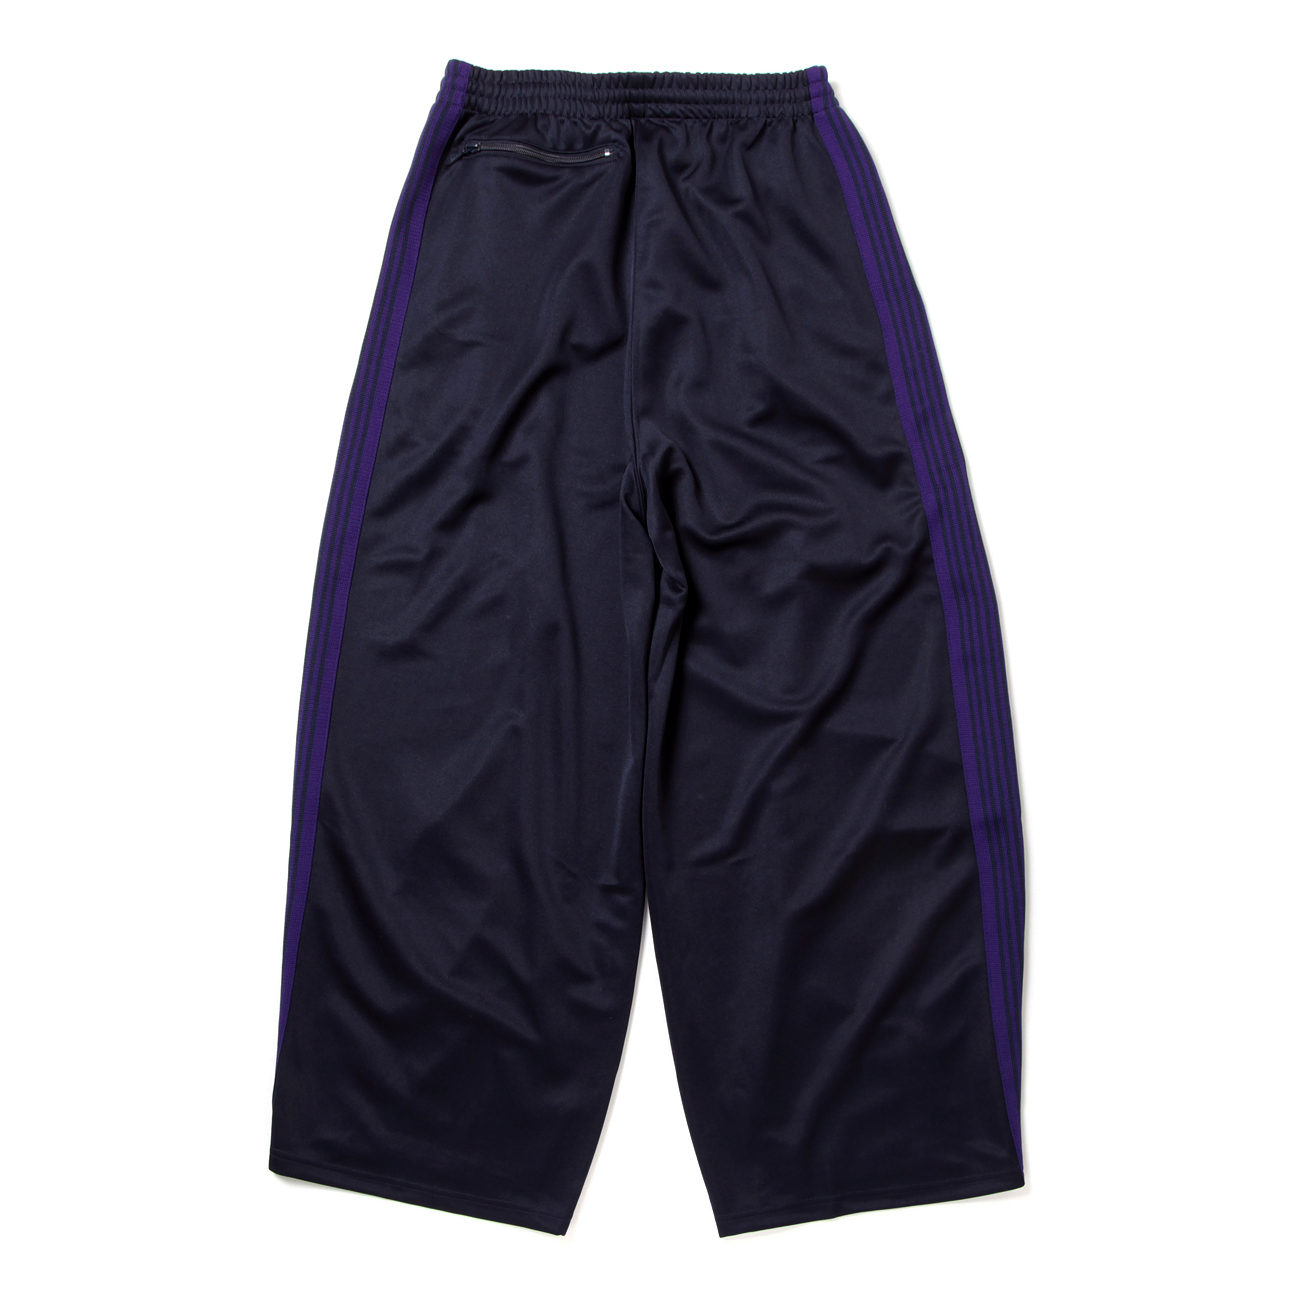 Needles / ニードルズ   H.D. Track Pant   Poly Smooth   Navy   通販